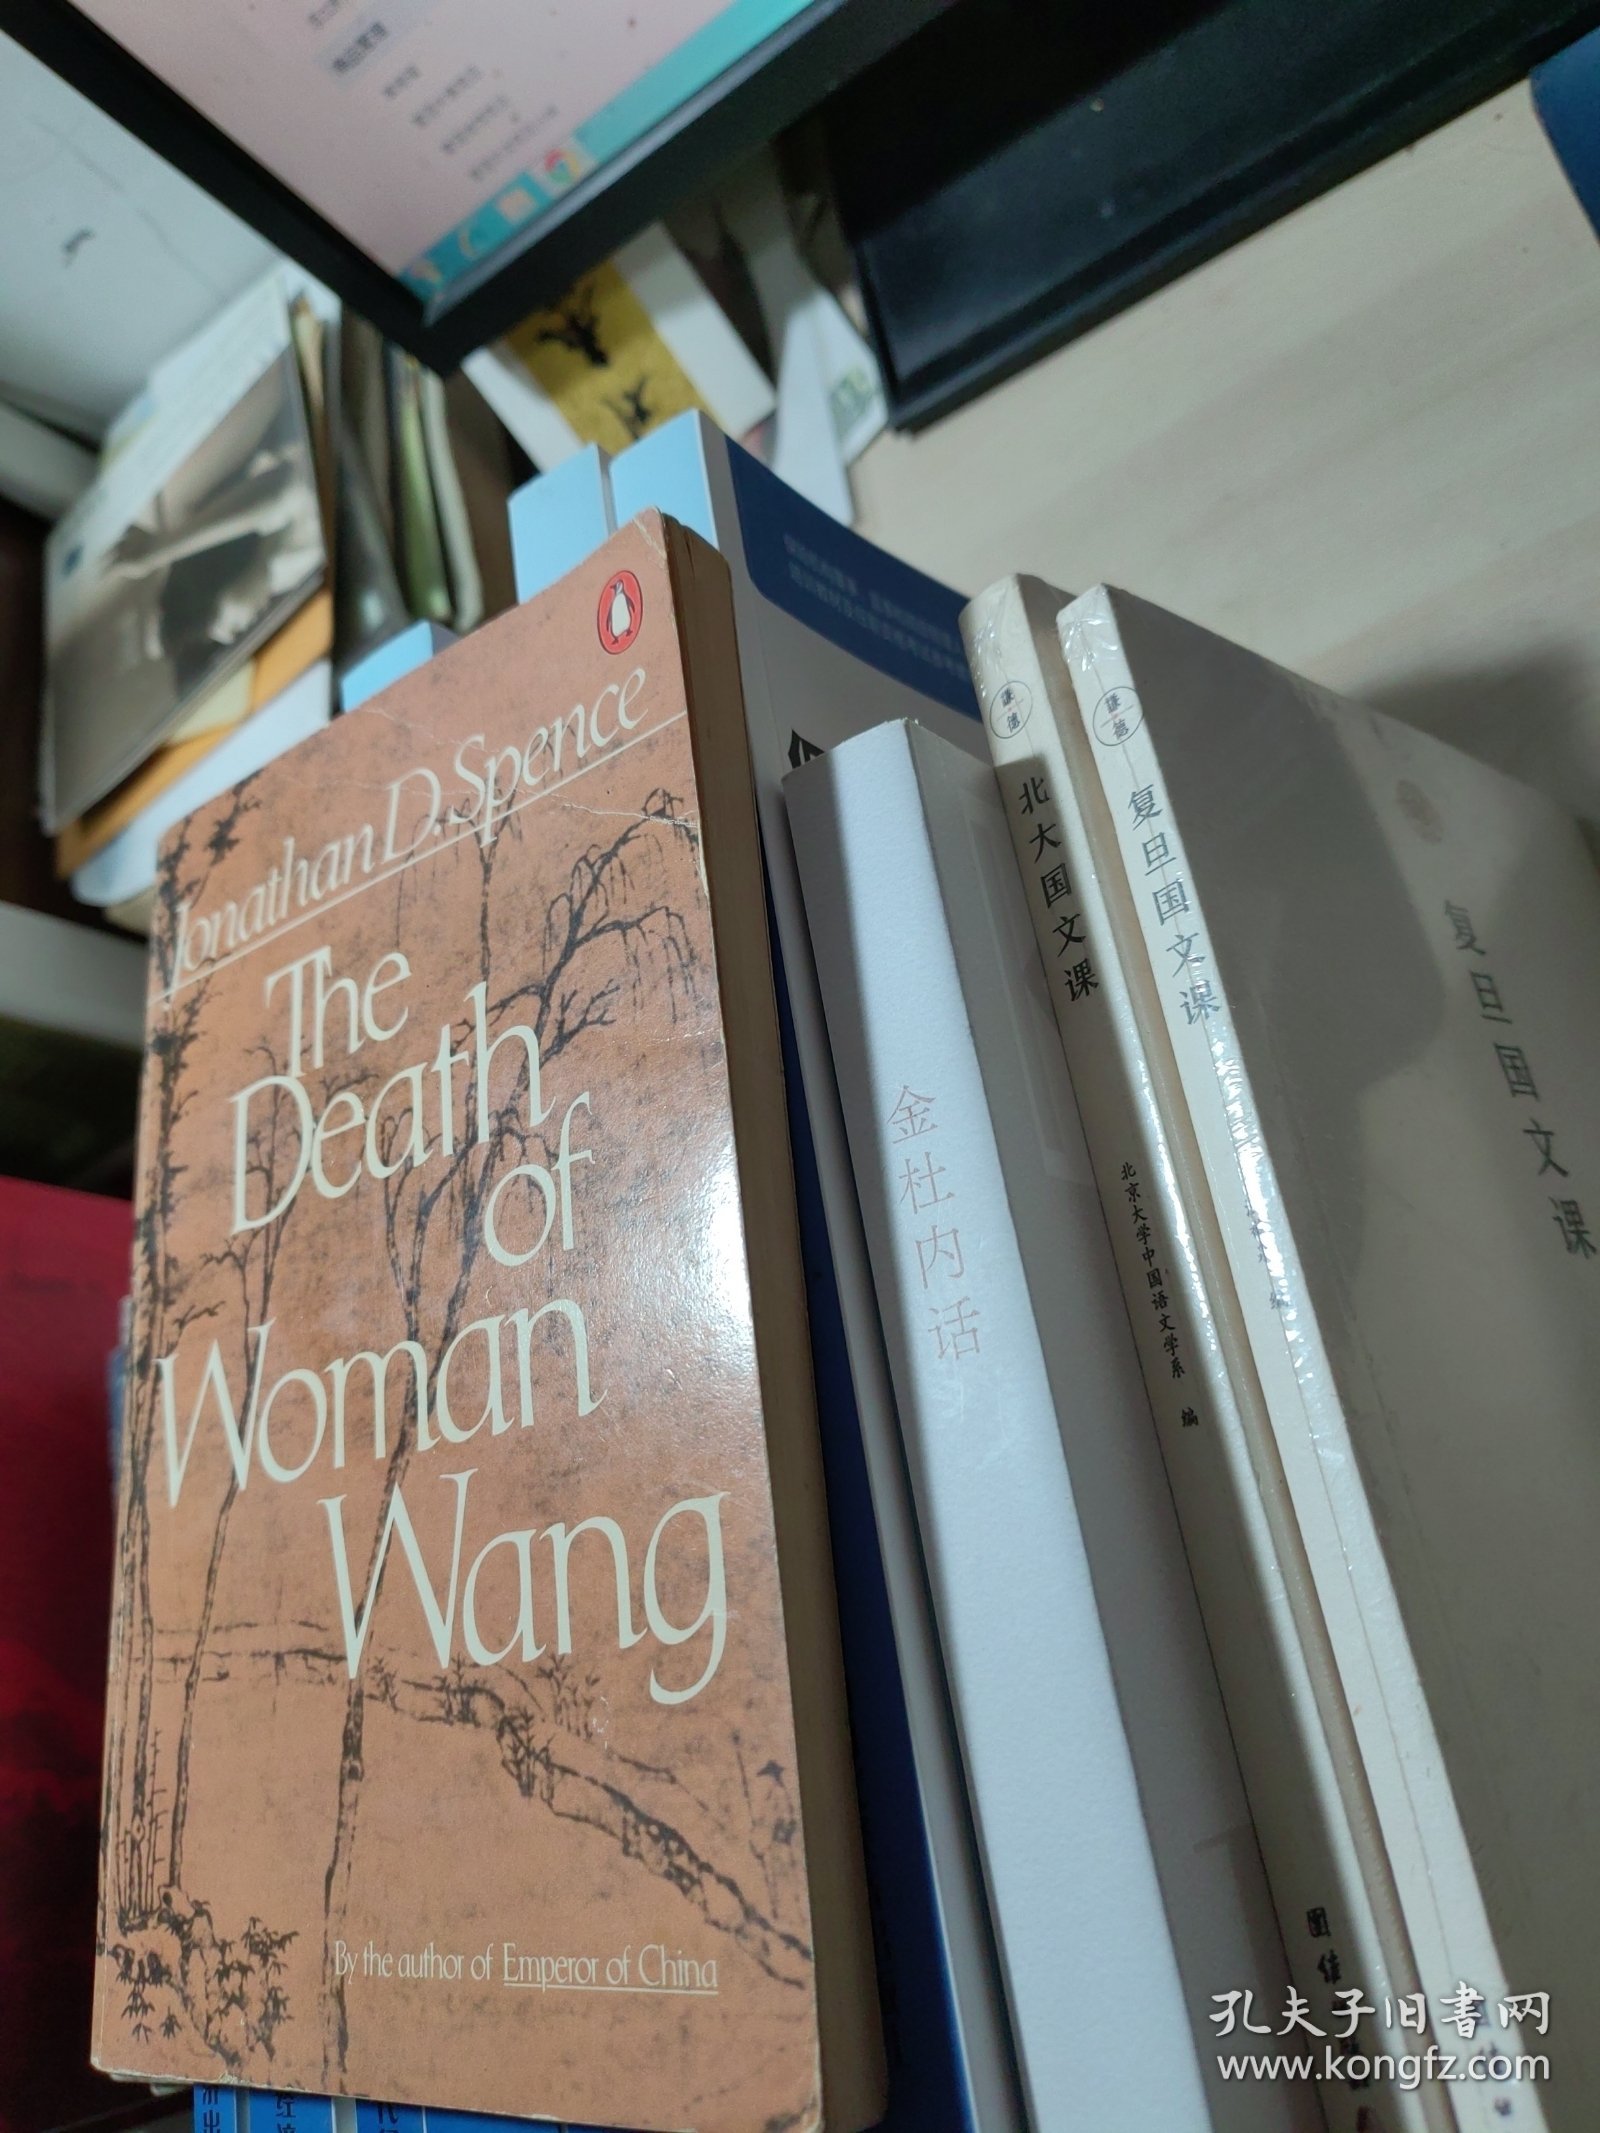 The Death of Woman Wang